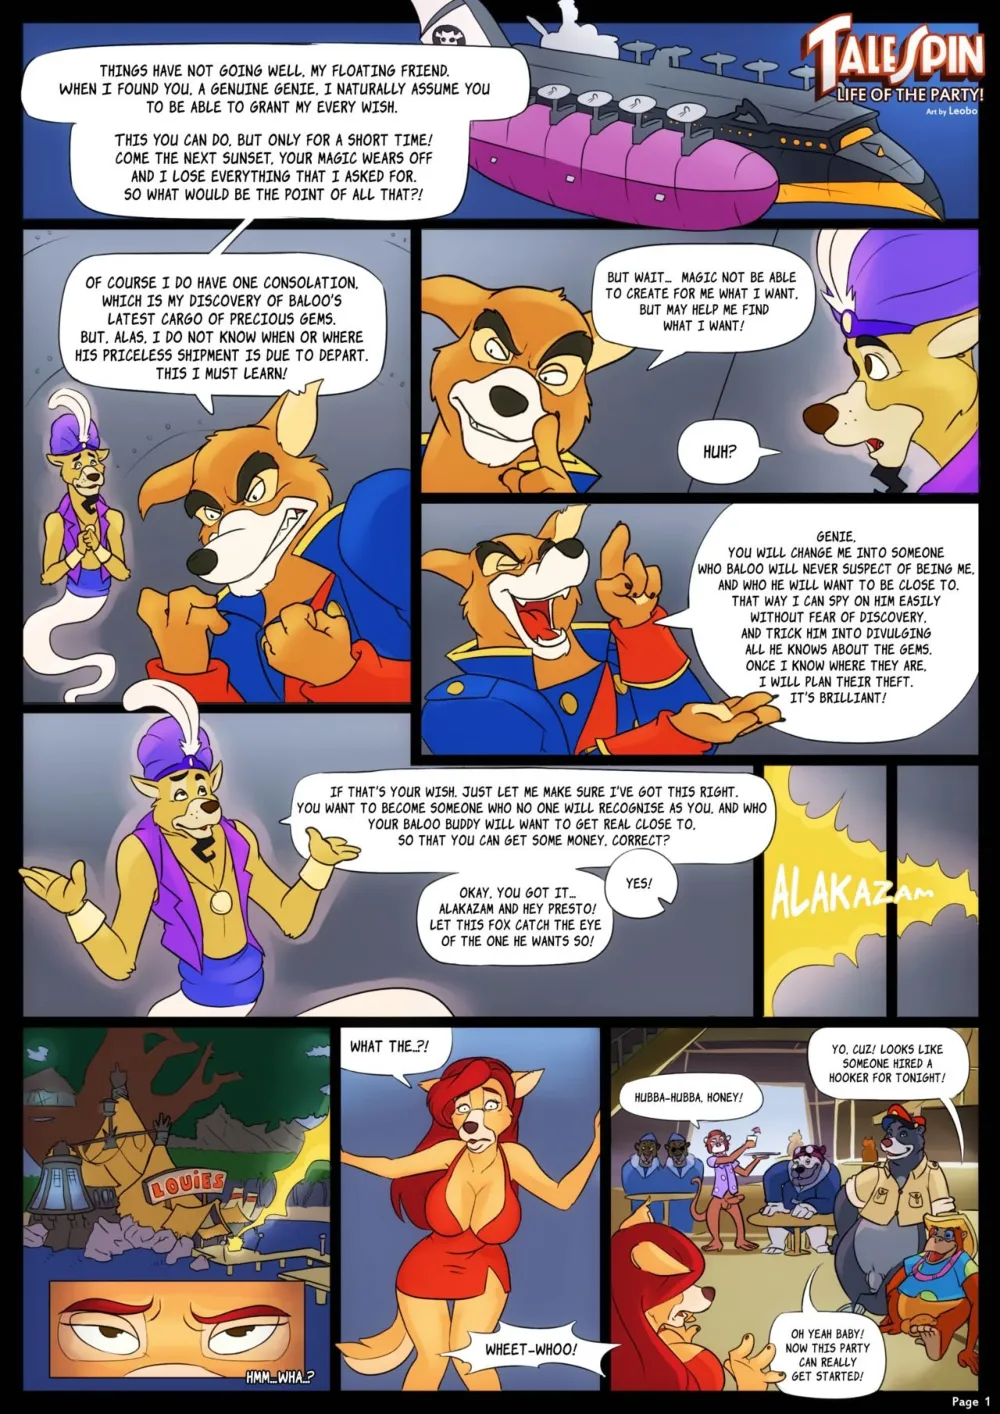 Life of the Party! - Page 1